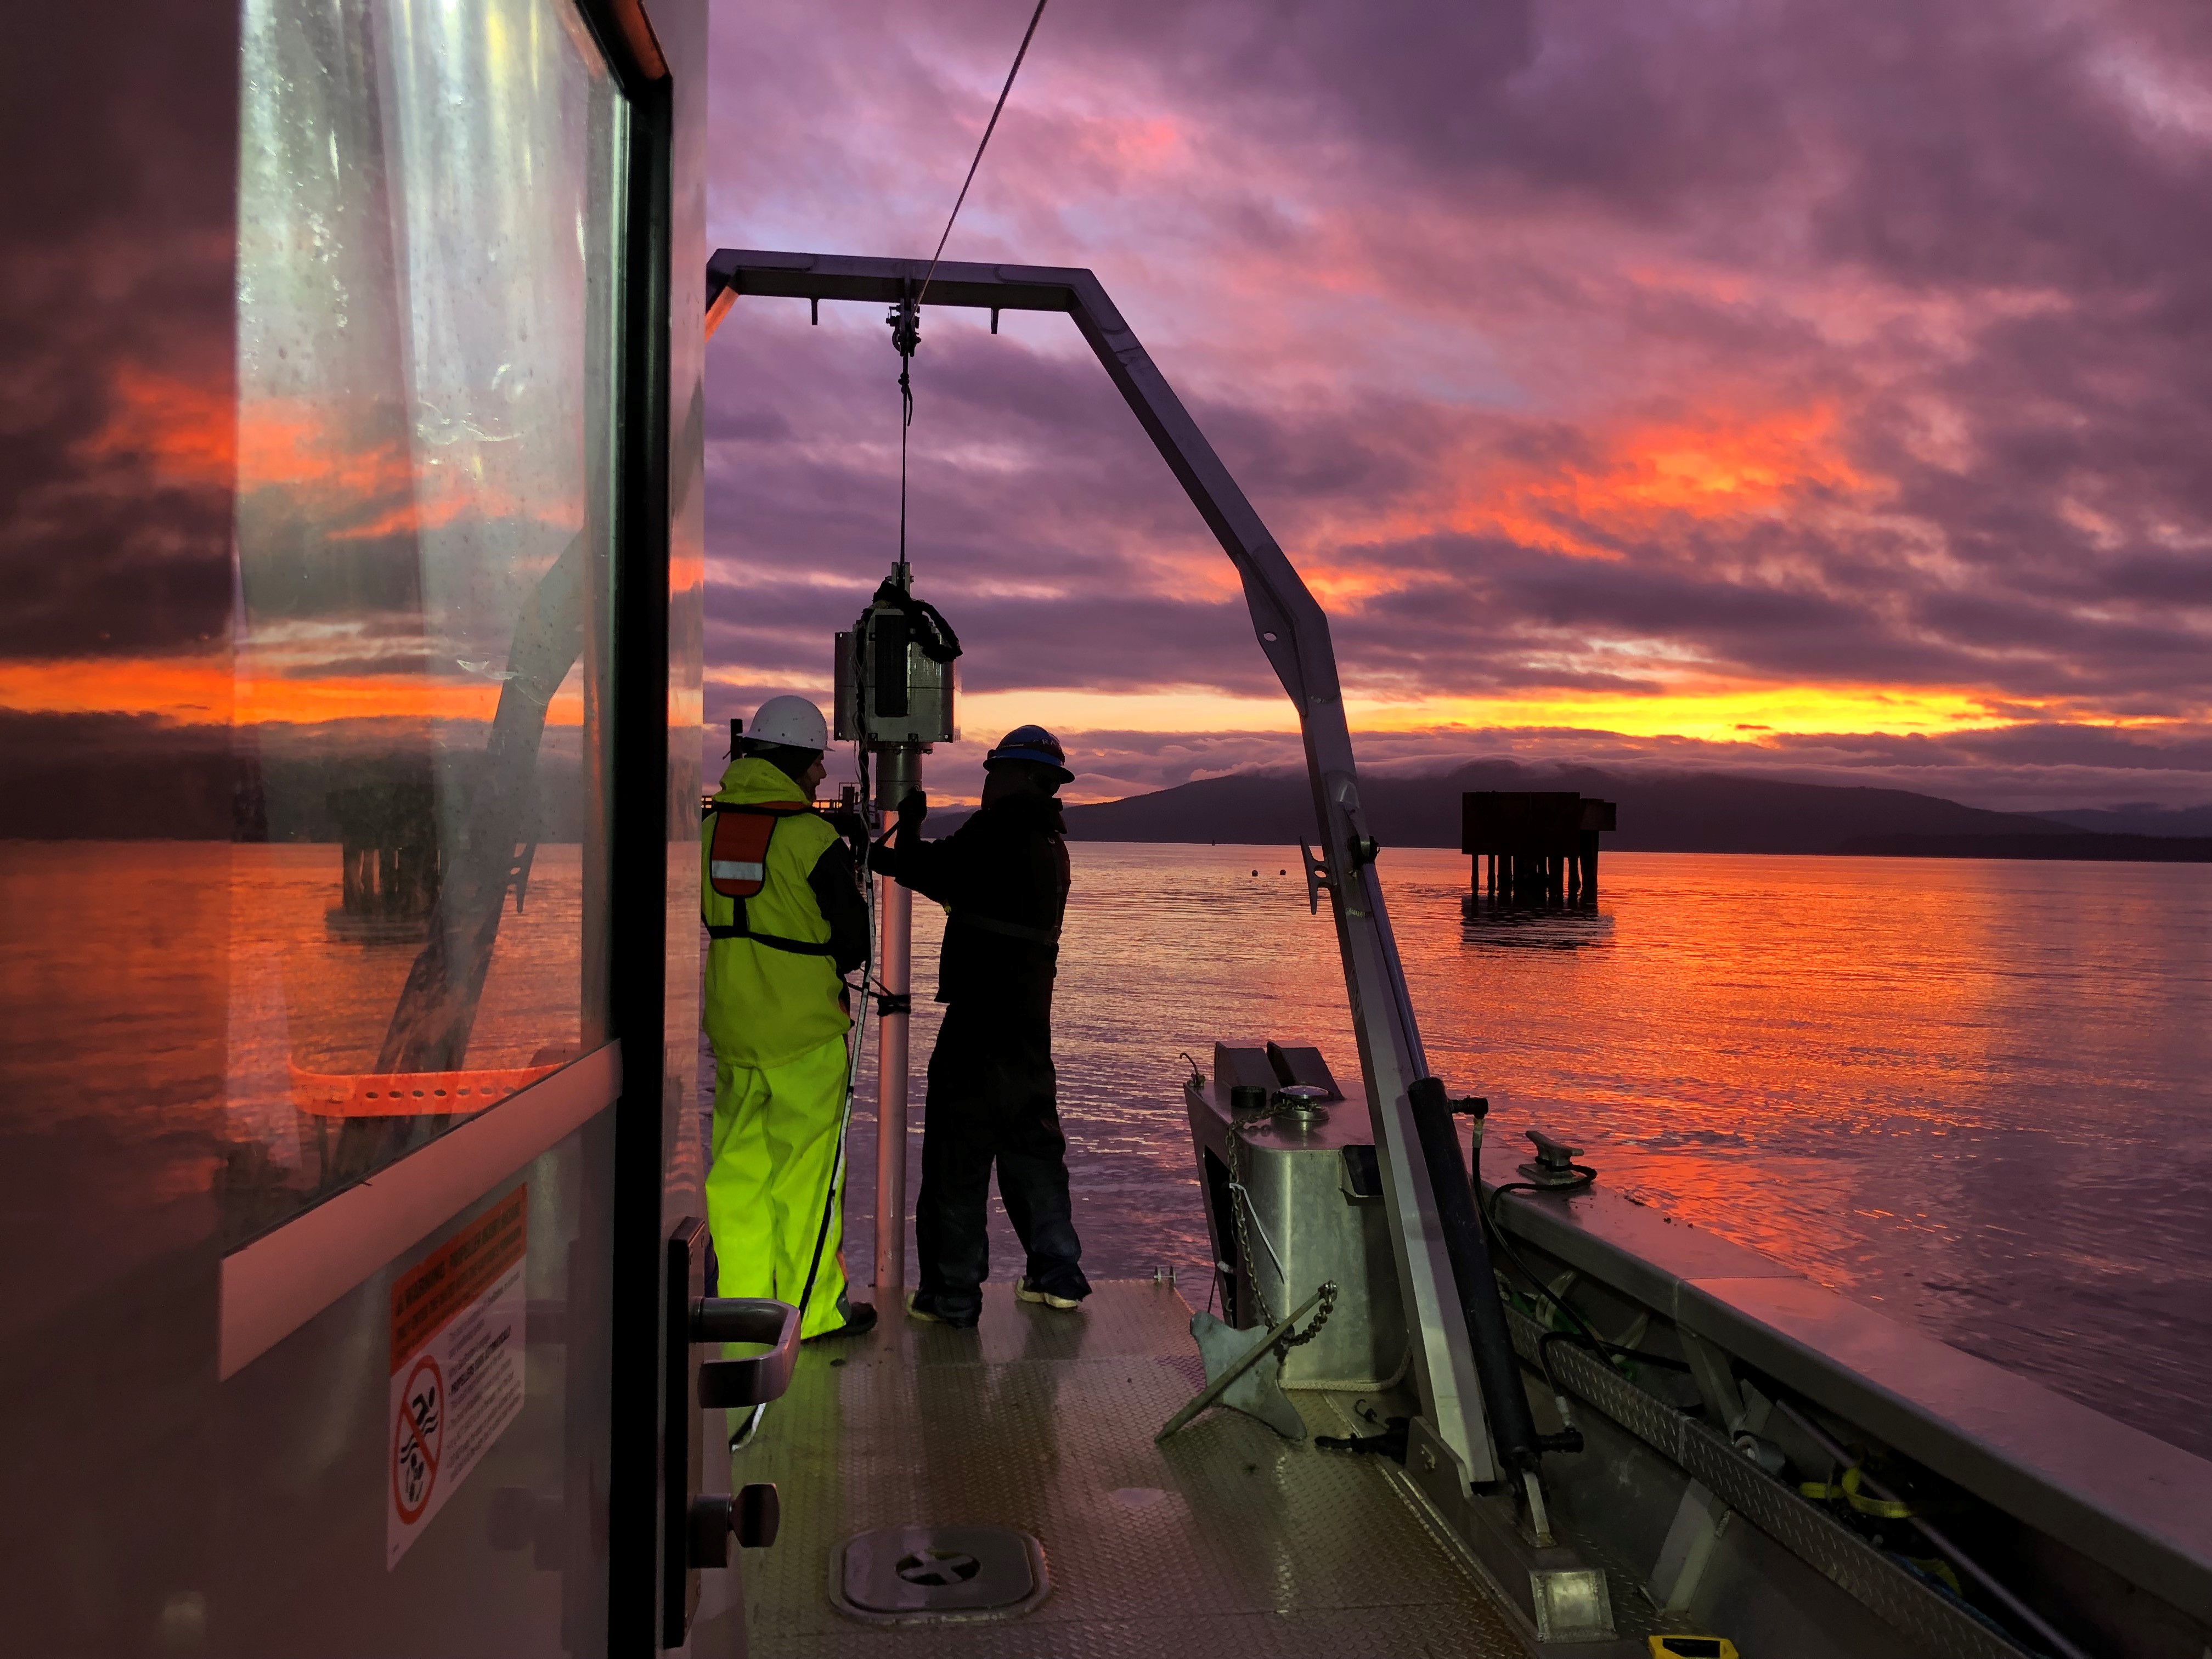 Crews on research boat working with equipment at sunset